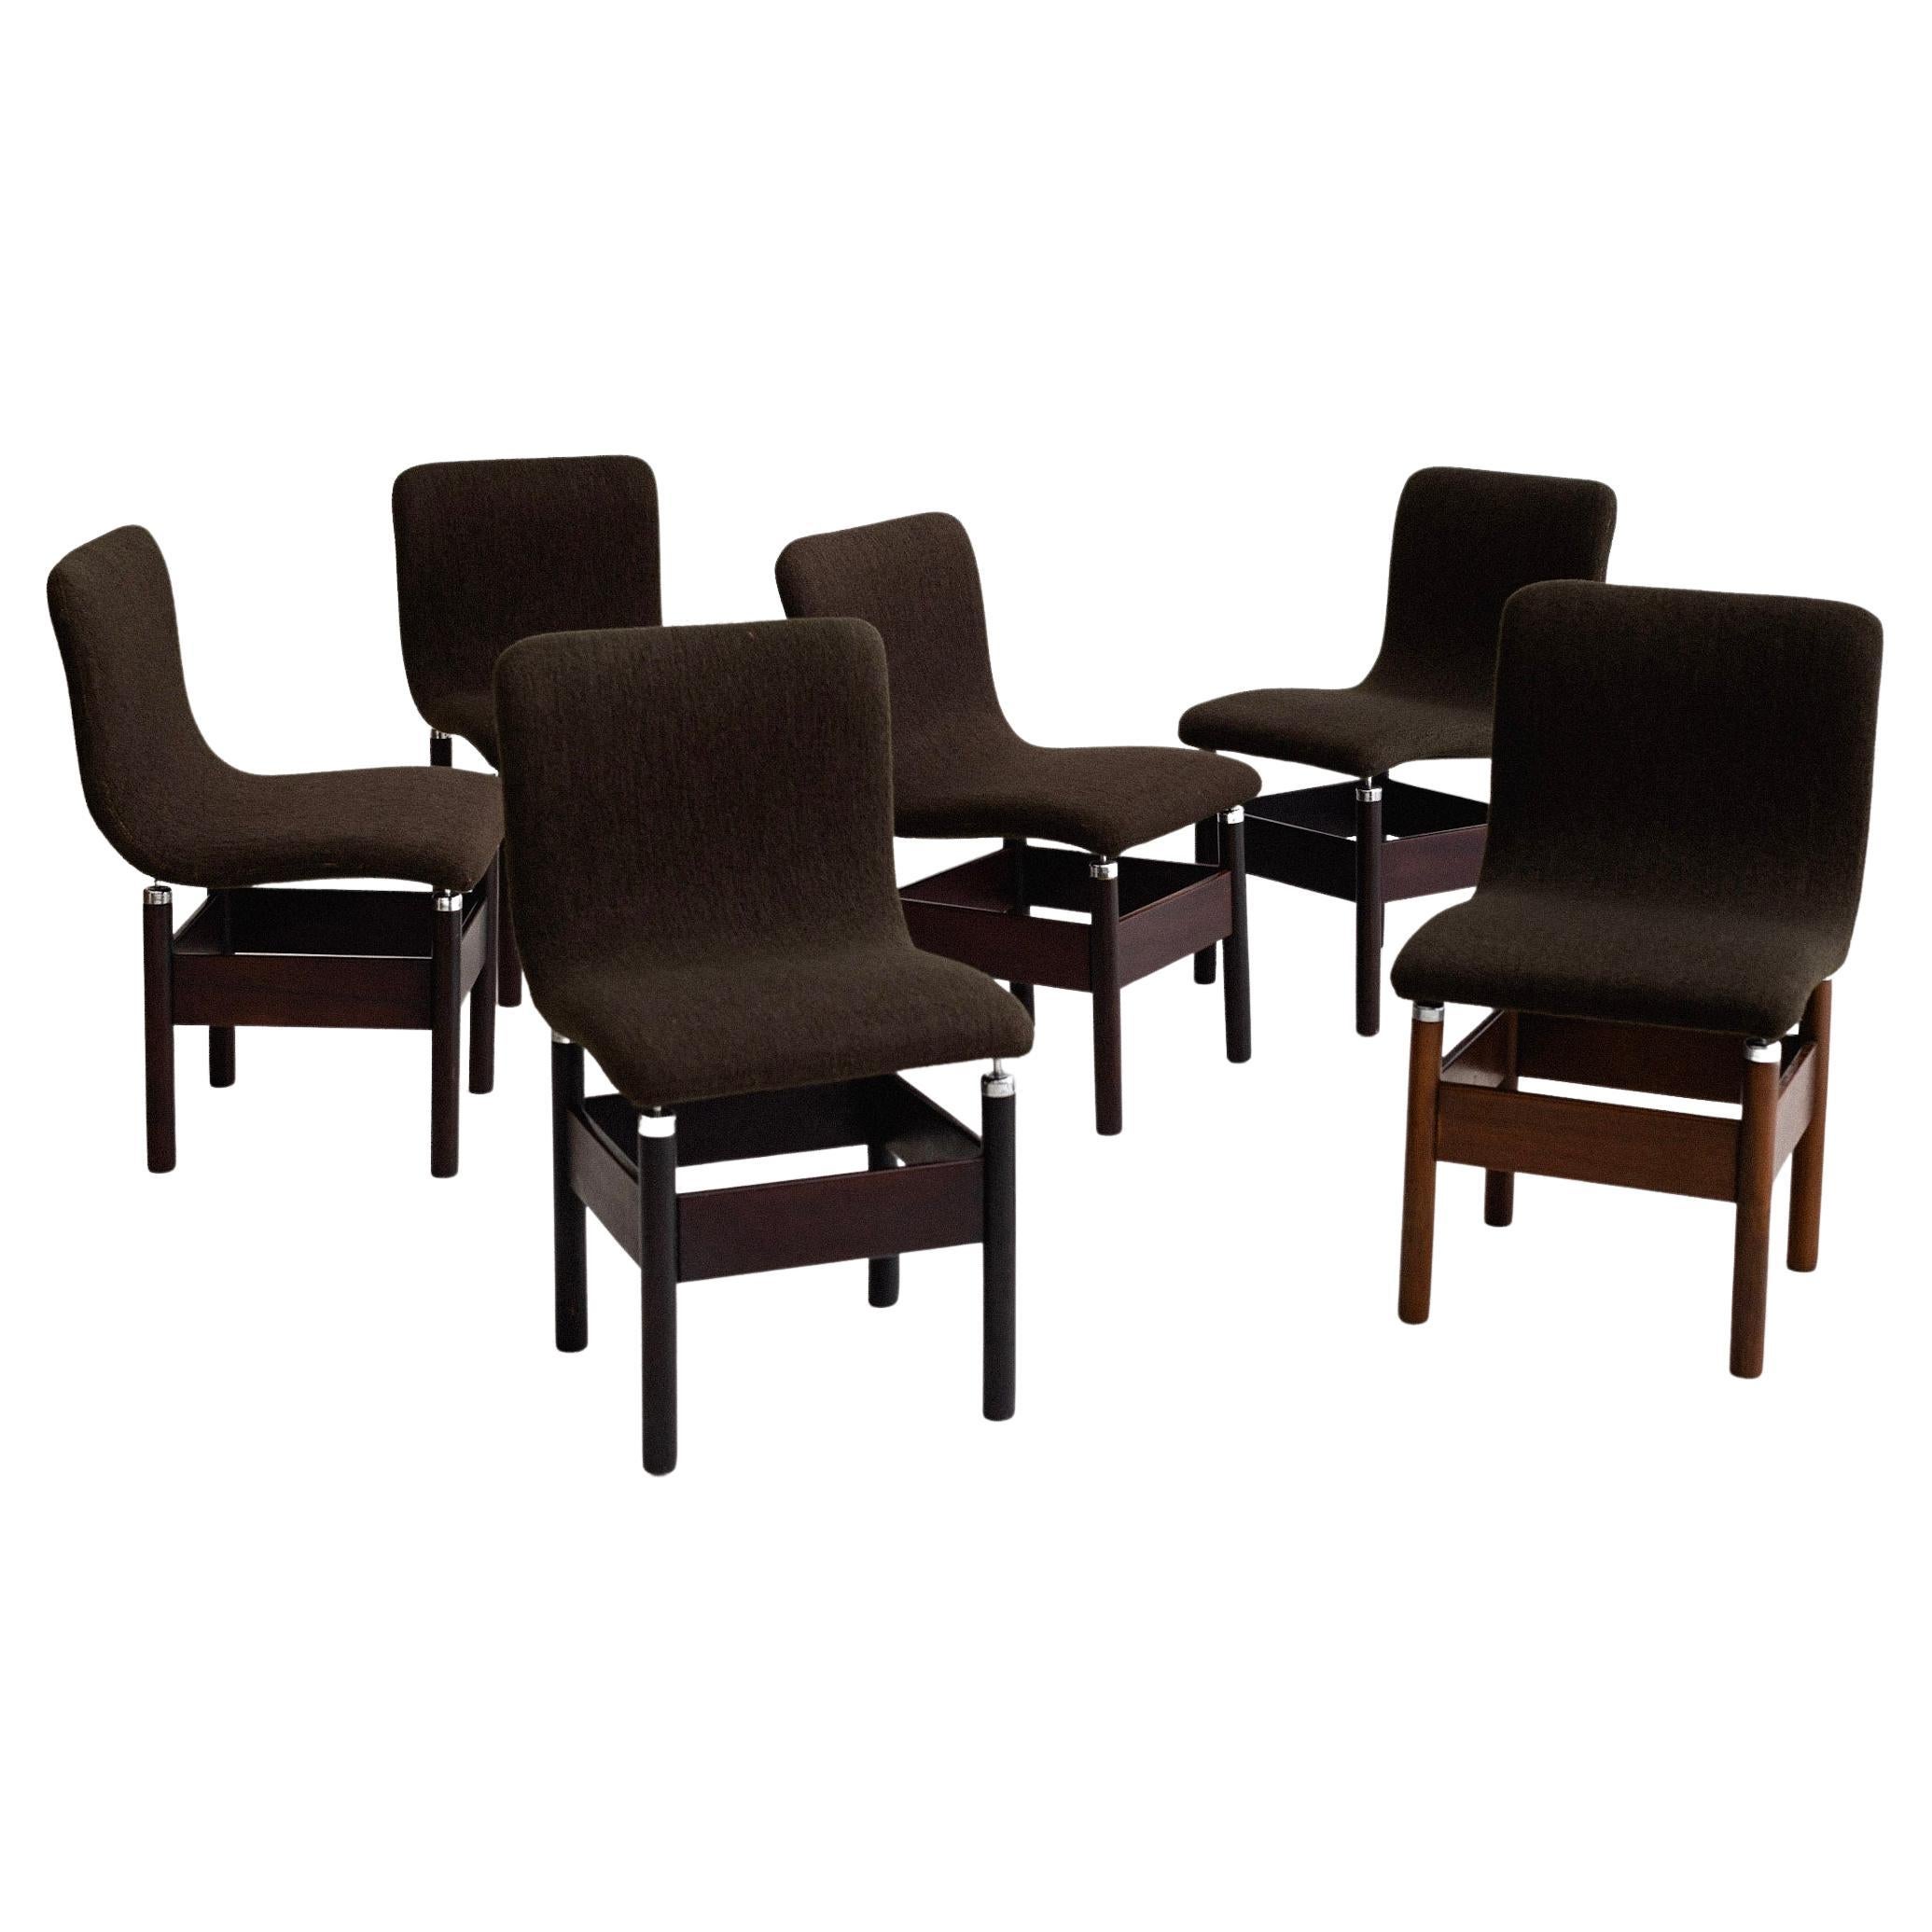 ‘Chelsea’ Dining Chairs by Vittorio Introini for Saporiti, Set of 6 For Sale